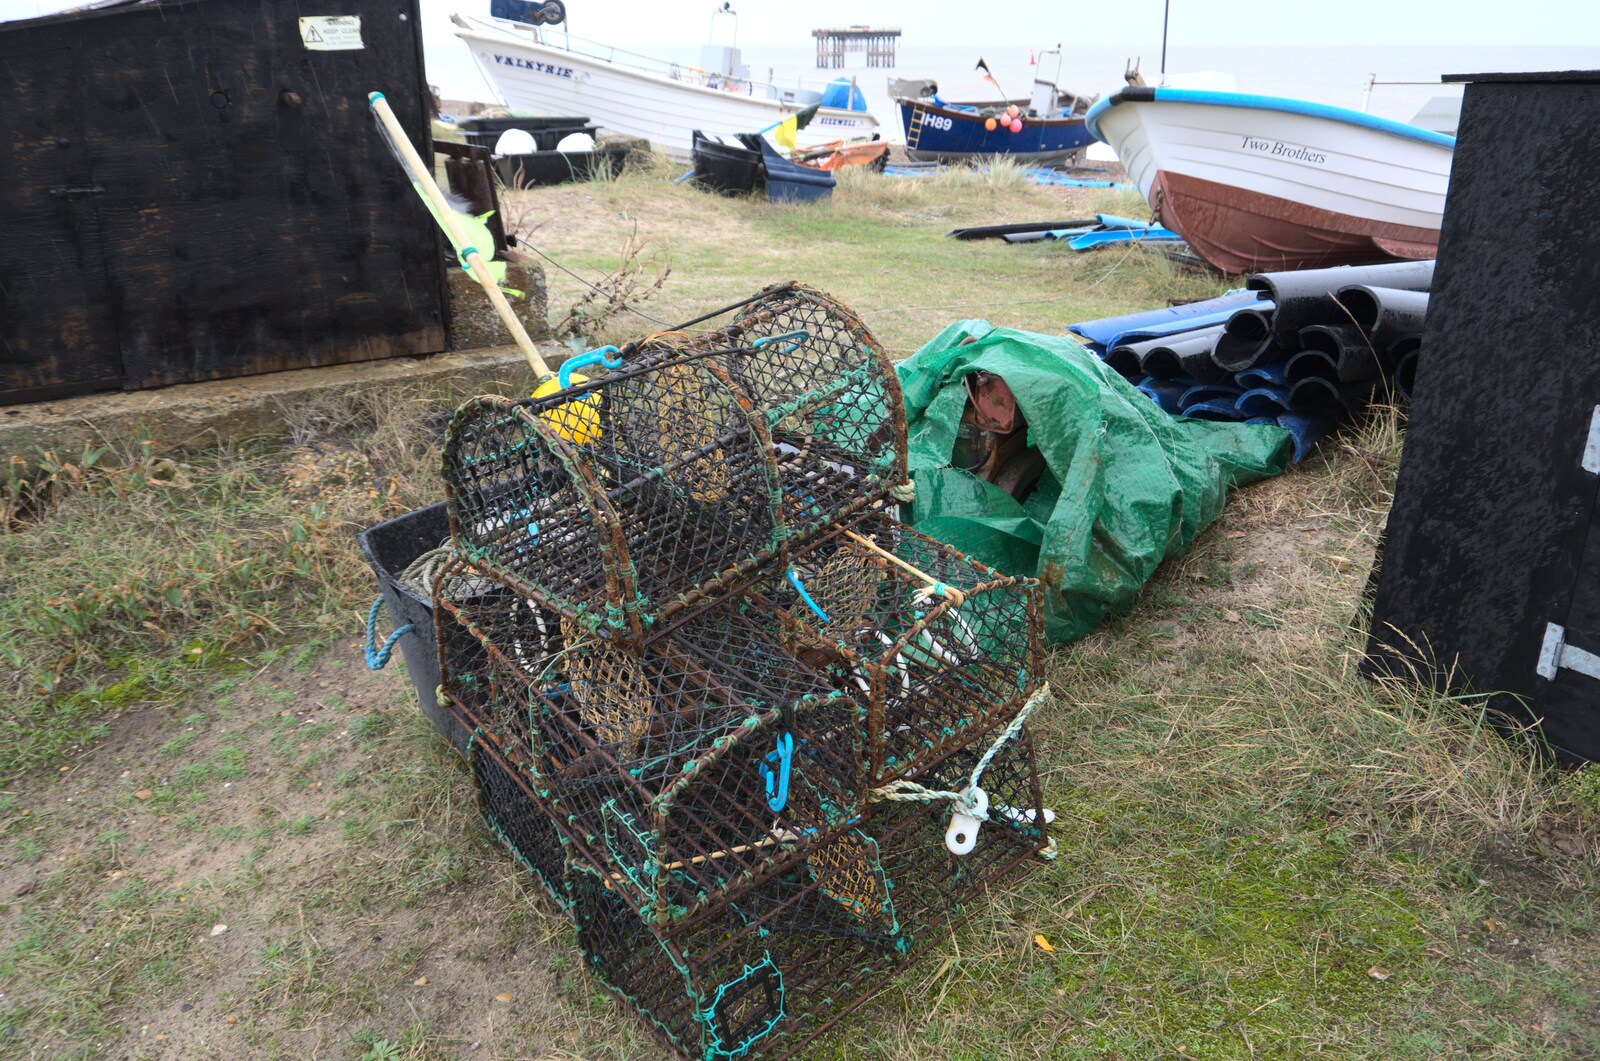 Old lobster pots from Sizewell Beach and the Lion Pub, Sizewell and Theberton, Suffolk - 4th October 2020